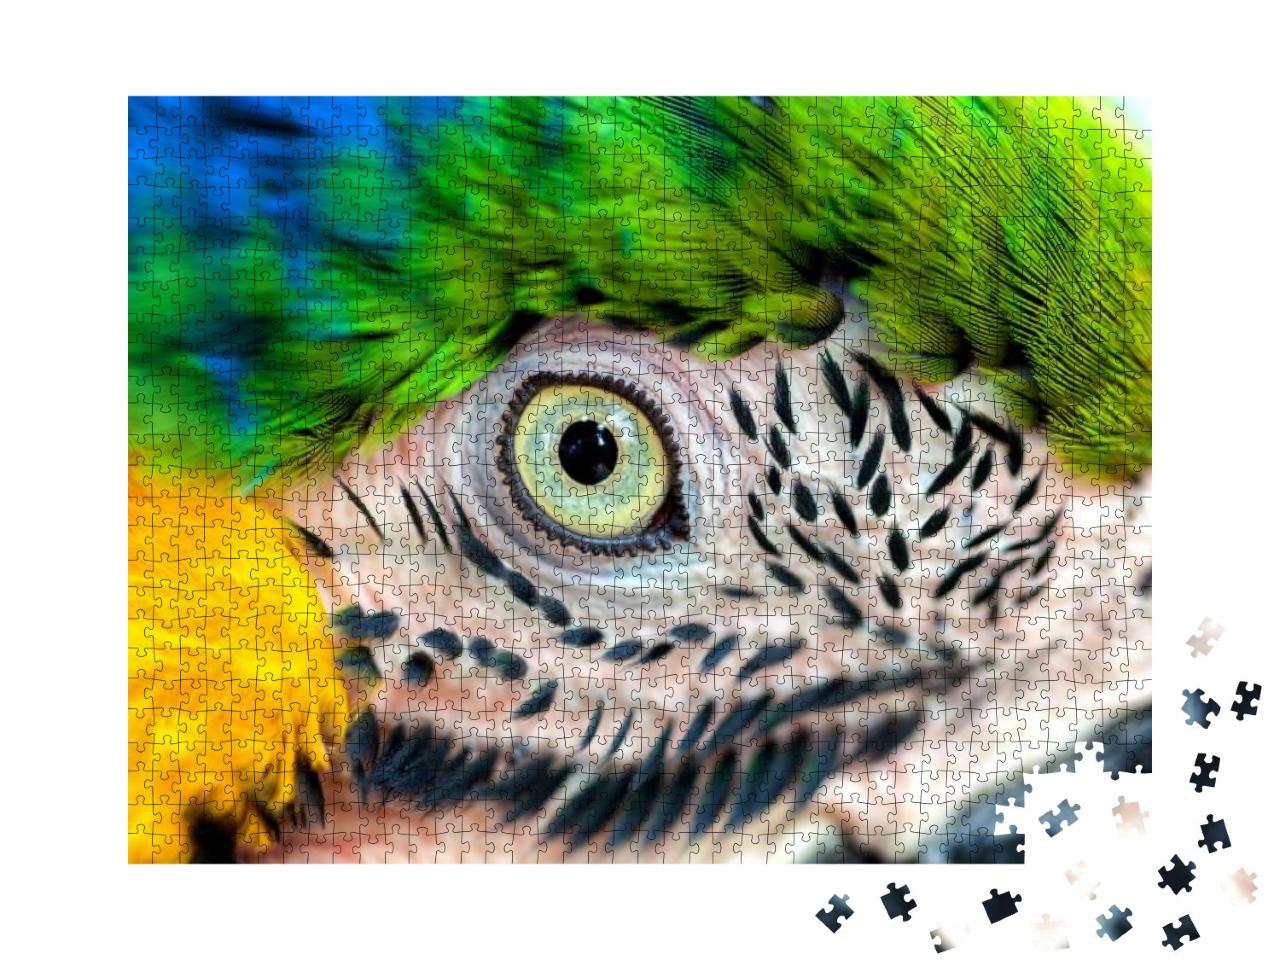 Amazing Colors in Nature. Beautiful Eye Wild Parrot Bird... Jigsaw Puzzle with 1000 pieces